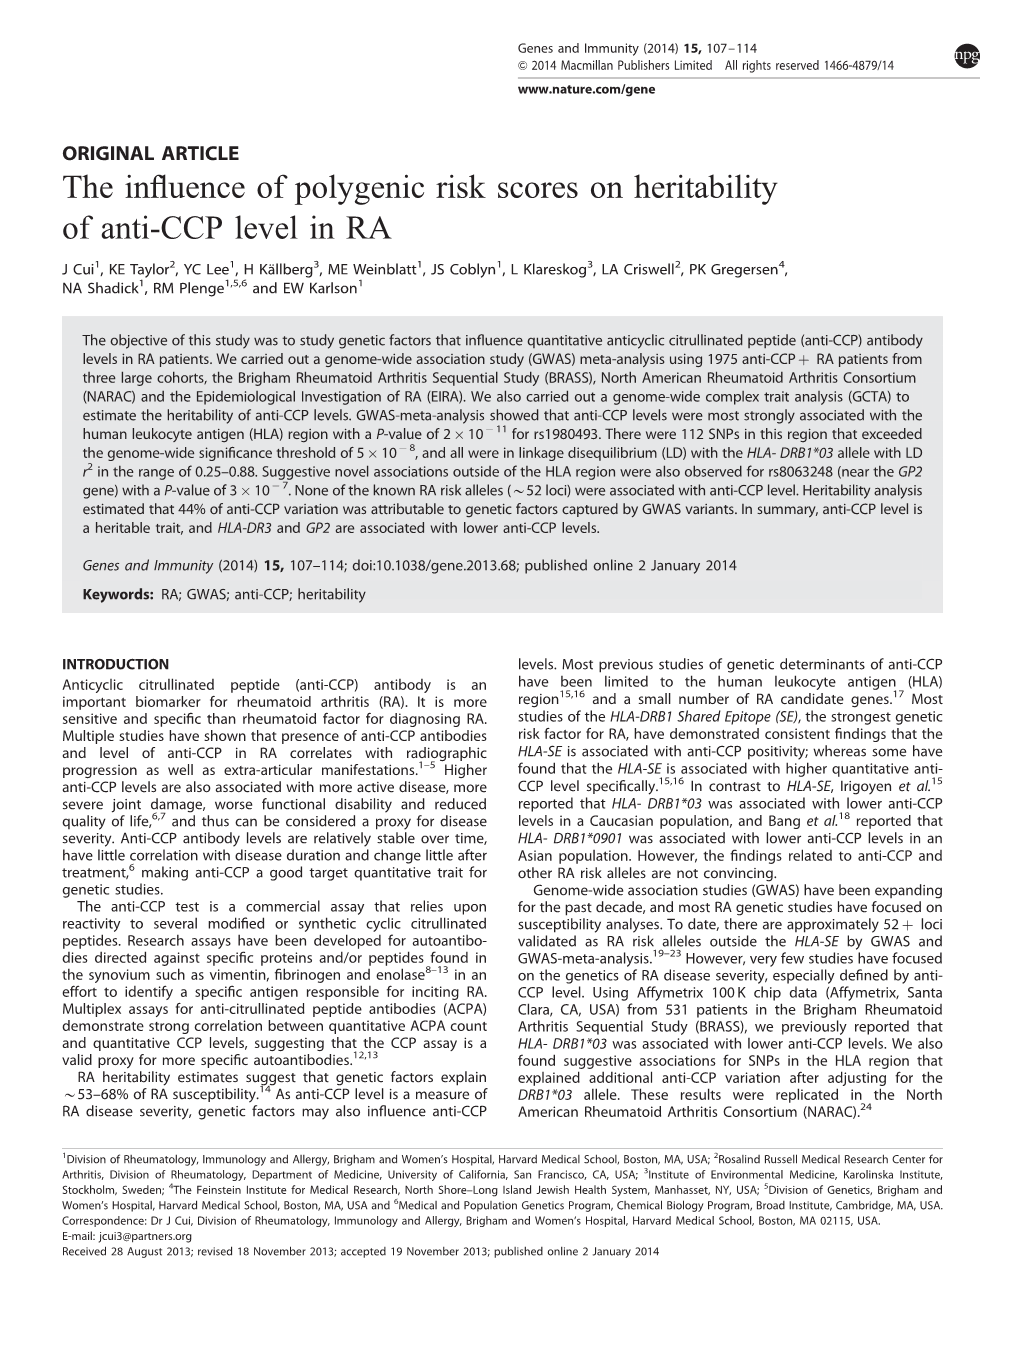 The Influence of Polygenic Risk Scores on Heritability of Anti-CCP Level in RA